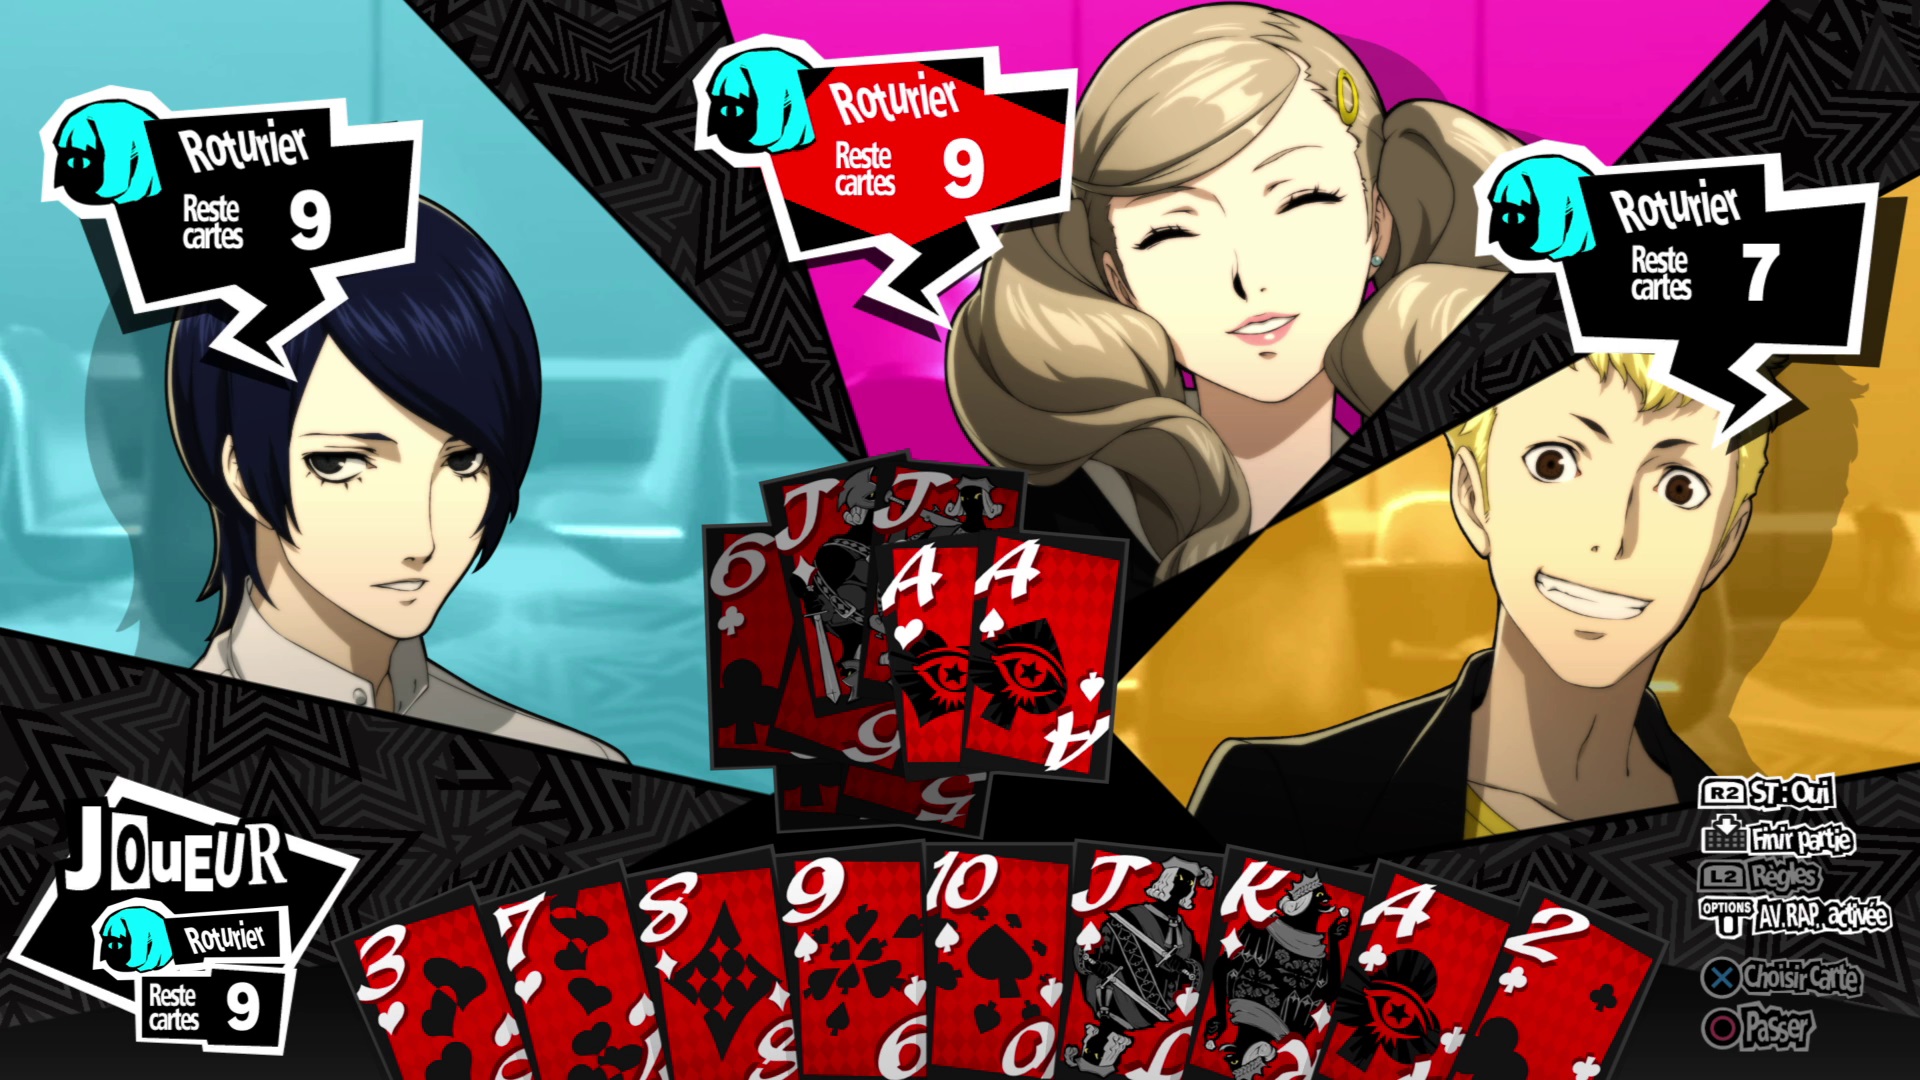 Persona 5 royale preview 03 3